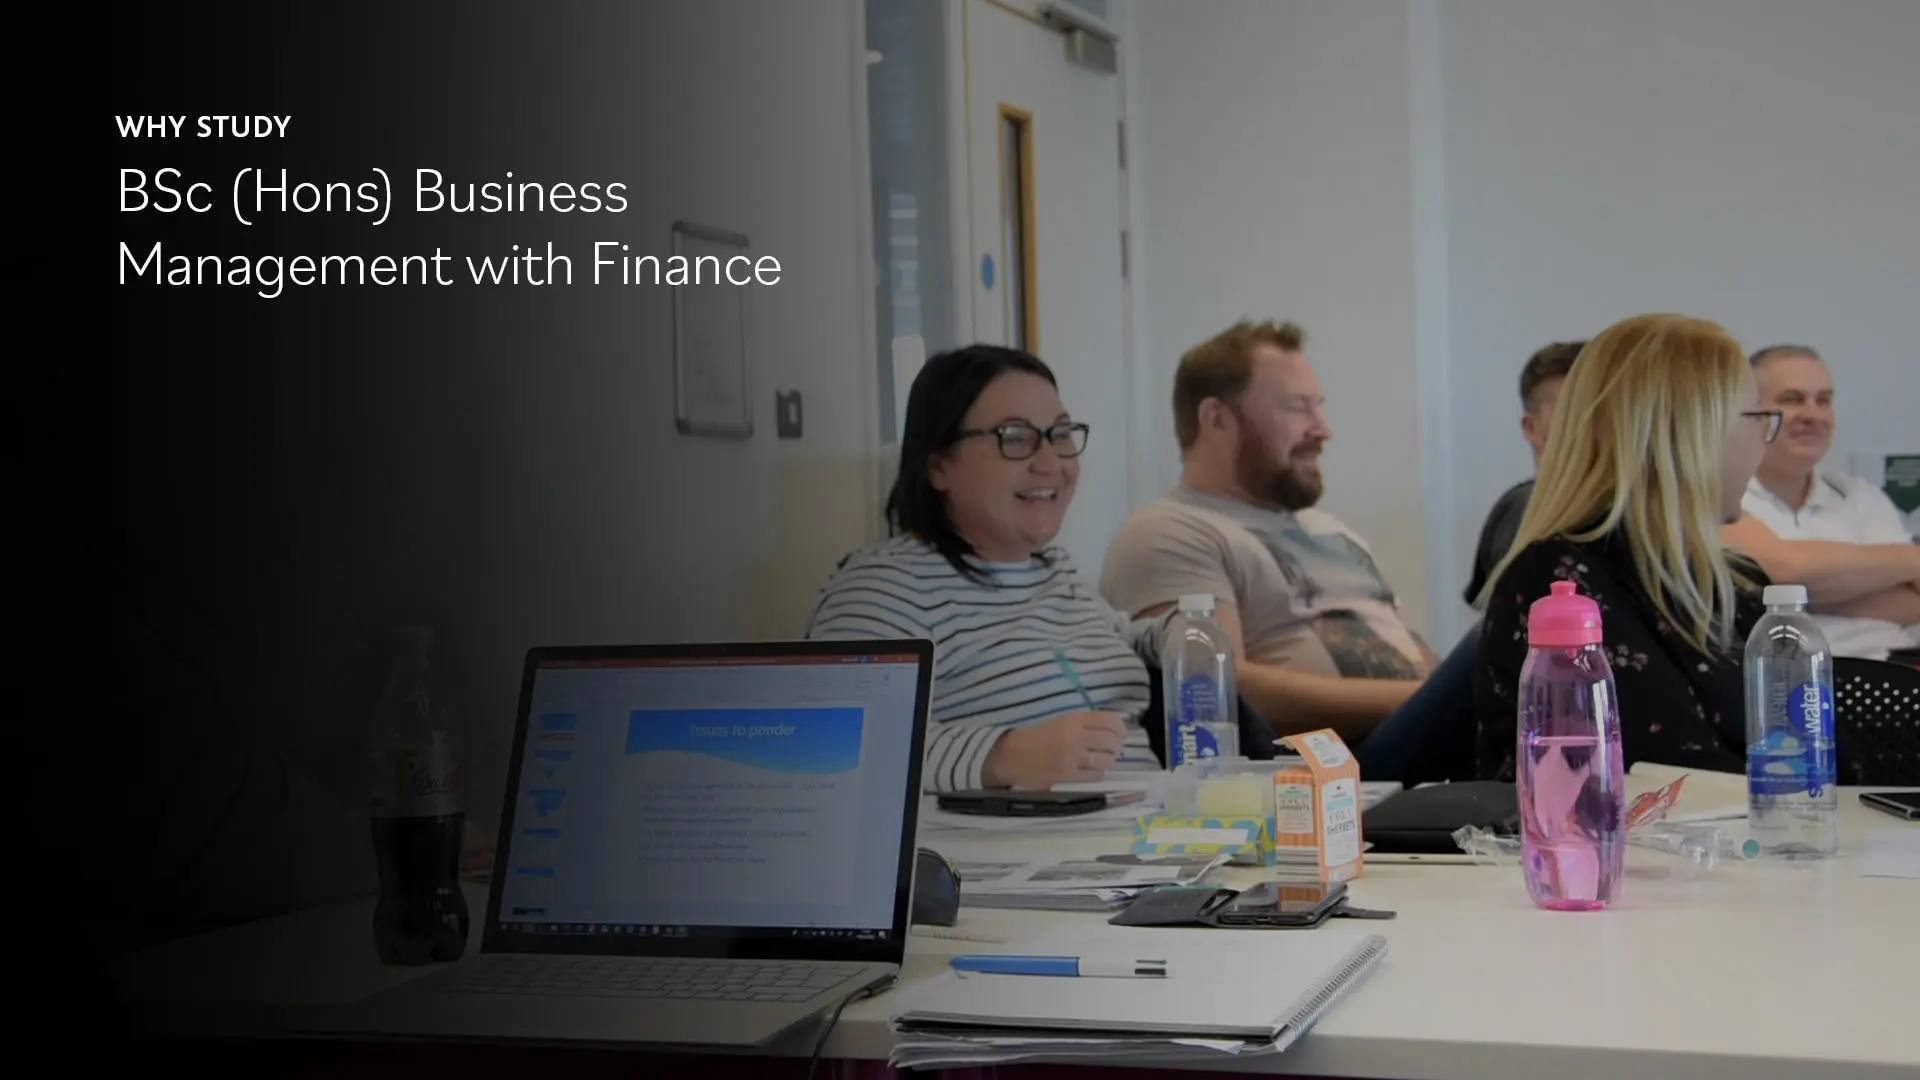 Image of students in a classroom laughing, with words saying: 'Why study BSc (Hons) Business Management with Finance